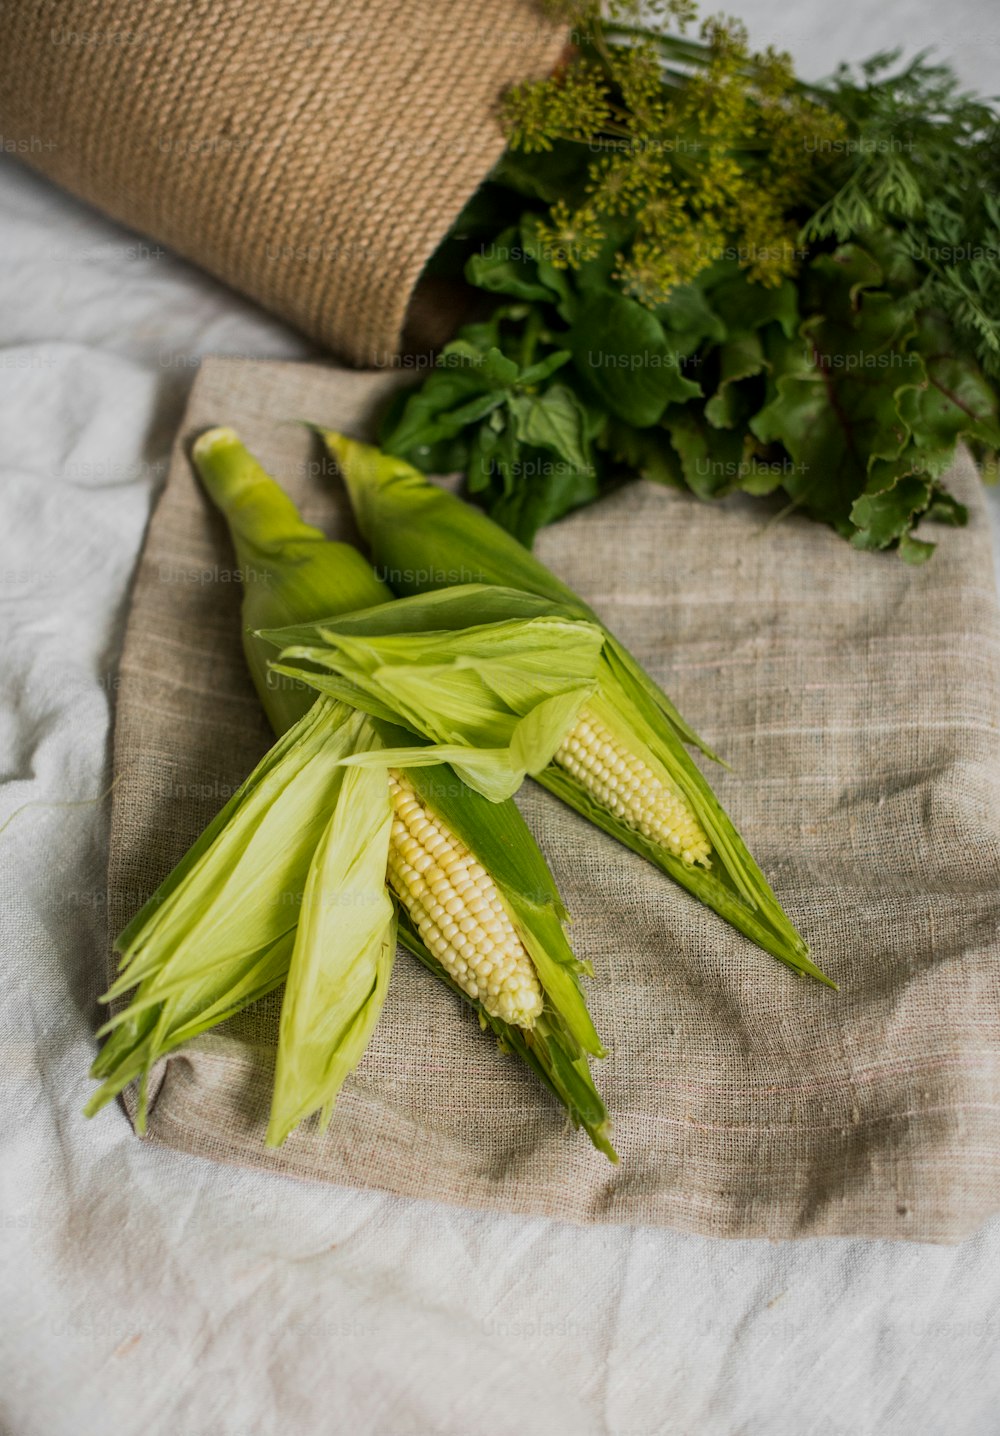 corn on the cob and other vegetables on a cloth